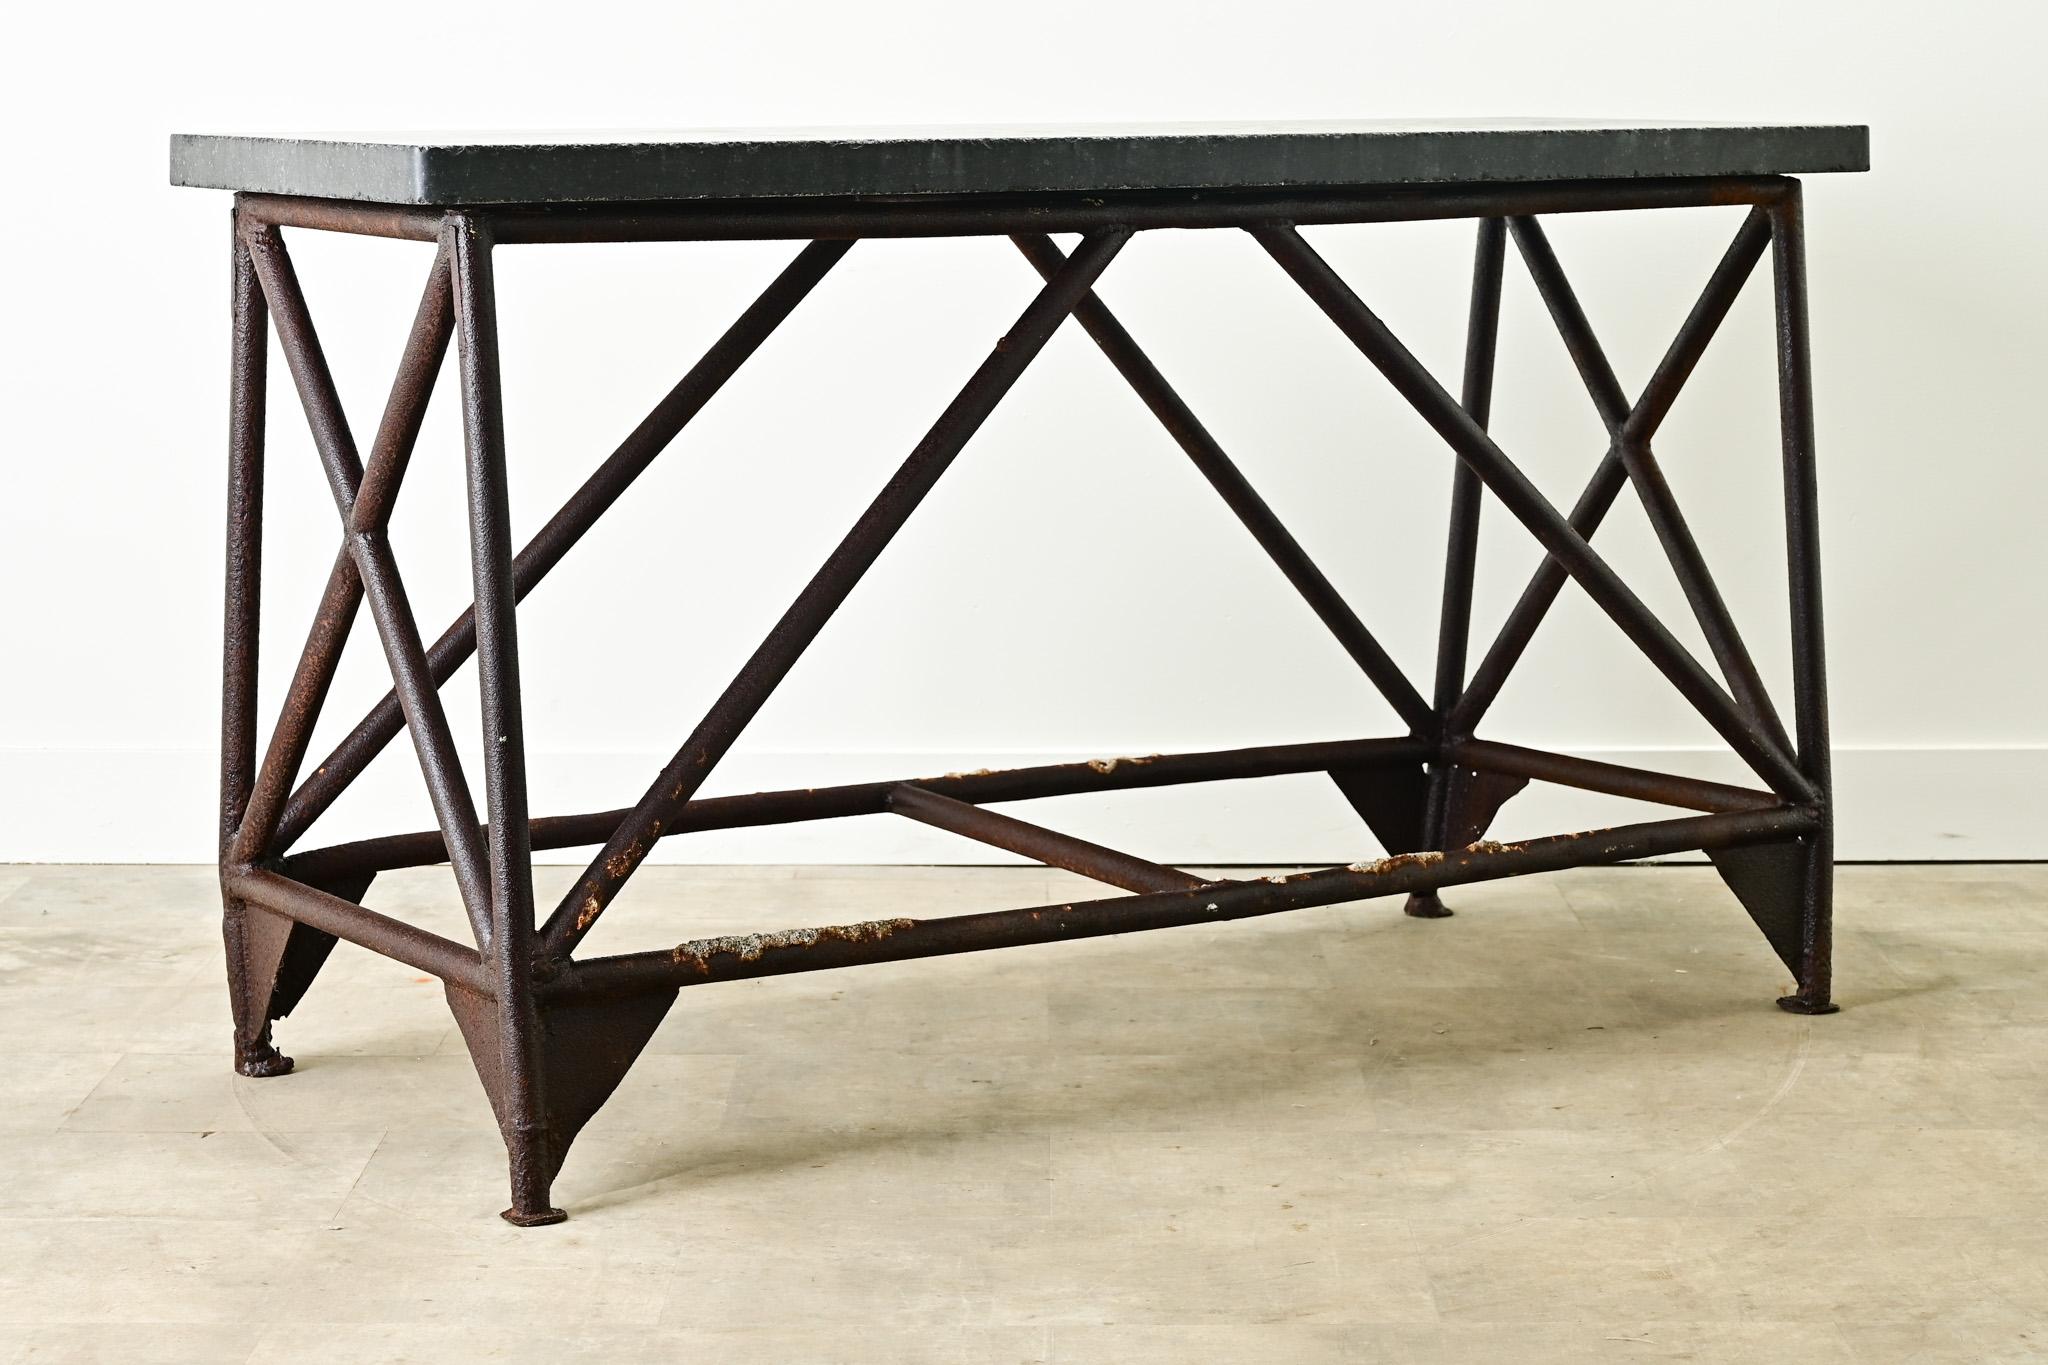 A Belgium Blue Stone and iron console made in the 1800’s. The Belgium blue stone top makes for a durable and usable surface and rests over a heavy iron base with geometric lines and patina only possible with age. This is the perfect console for